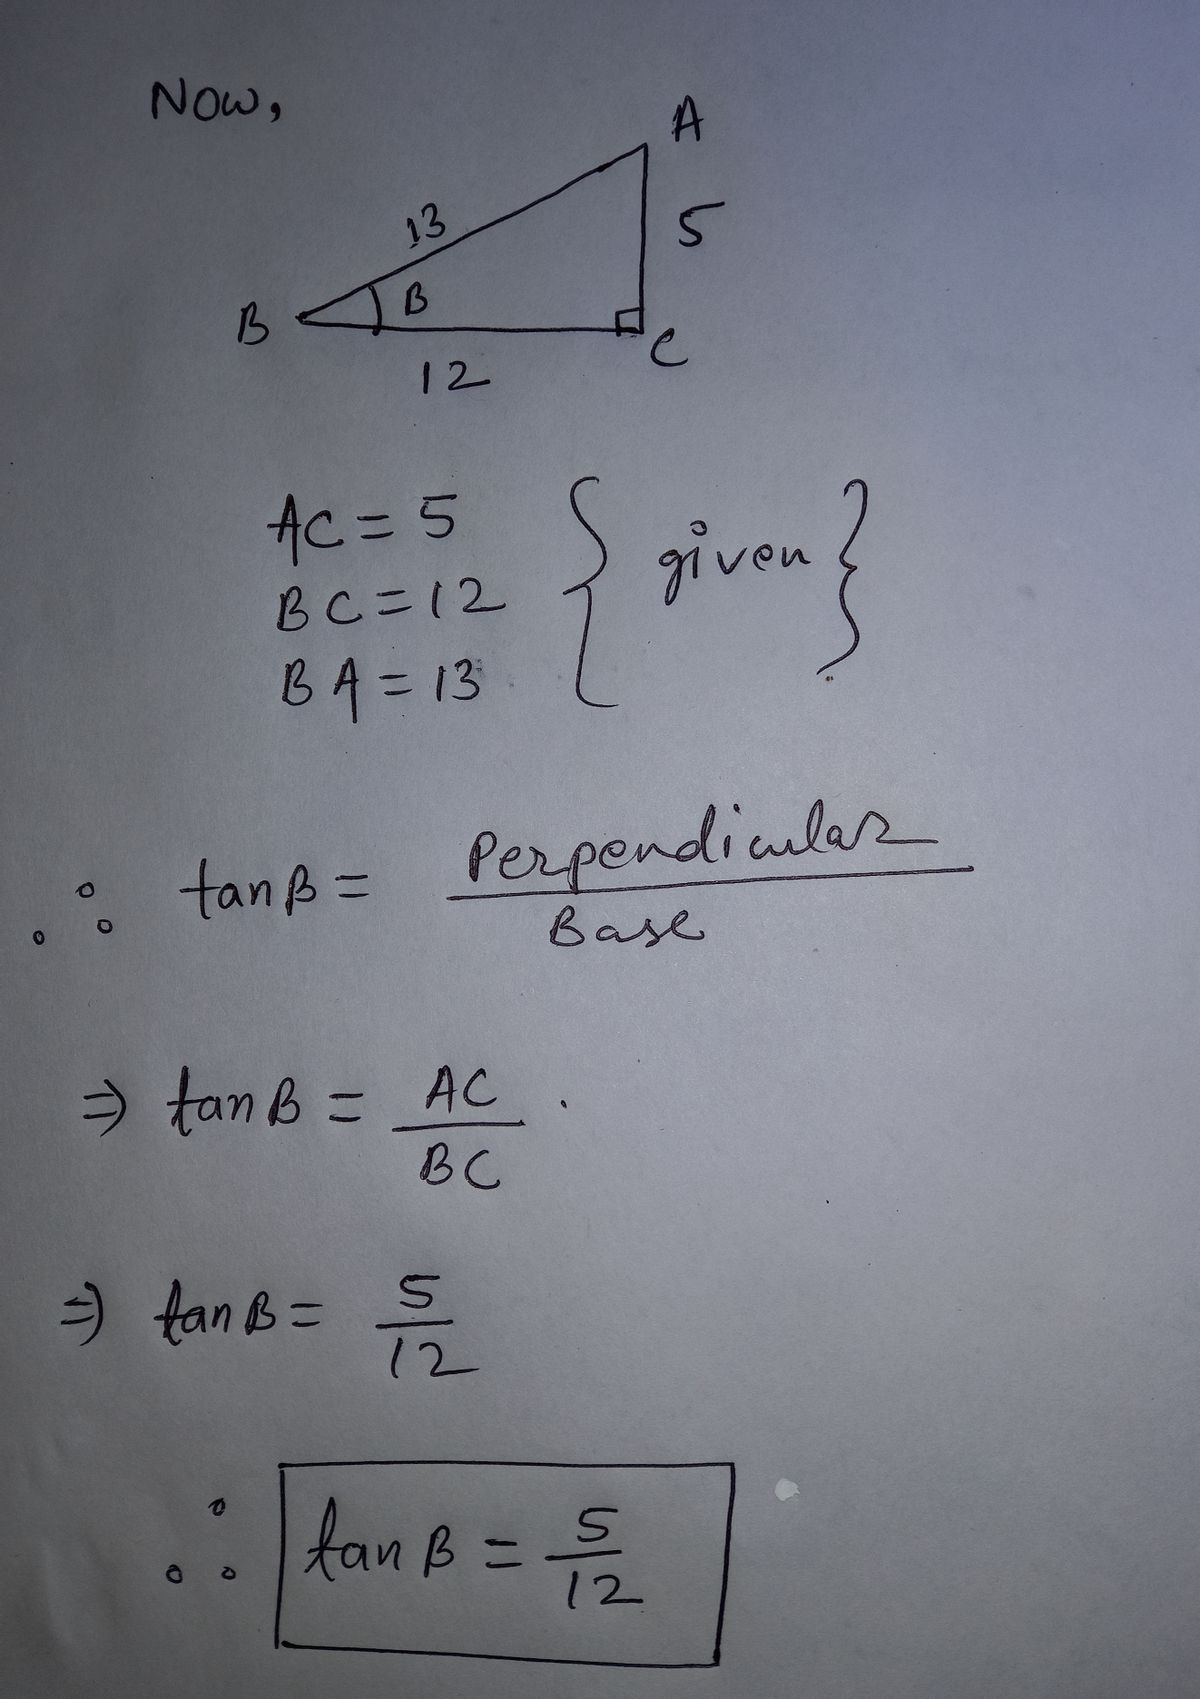 5-12-13 Triangle, Calculation, Angles & Examples - Lesson